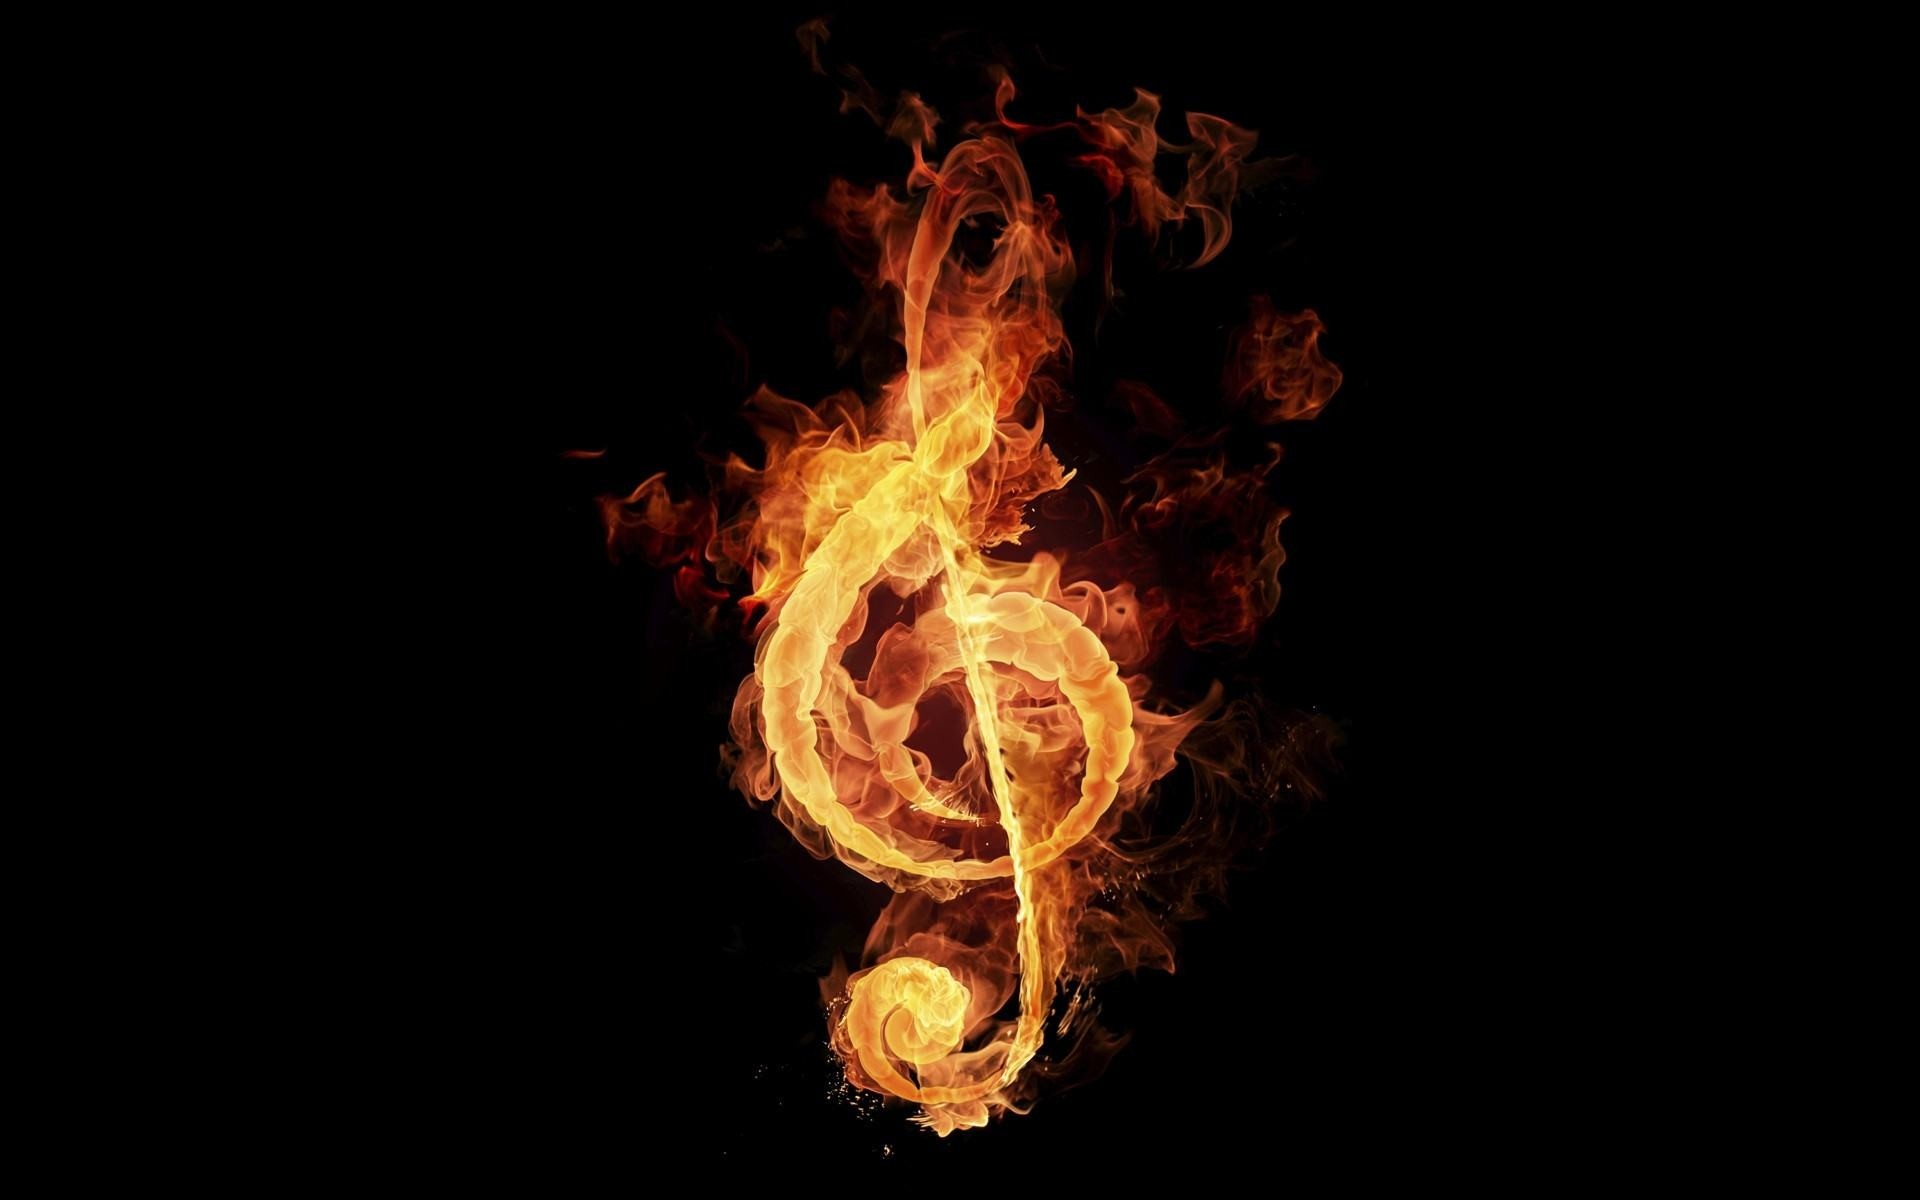 1920x1200 Wallpapers Backgrounds - Music Fire Artwork Black Background